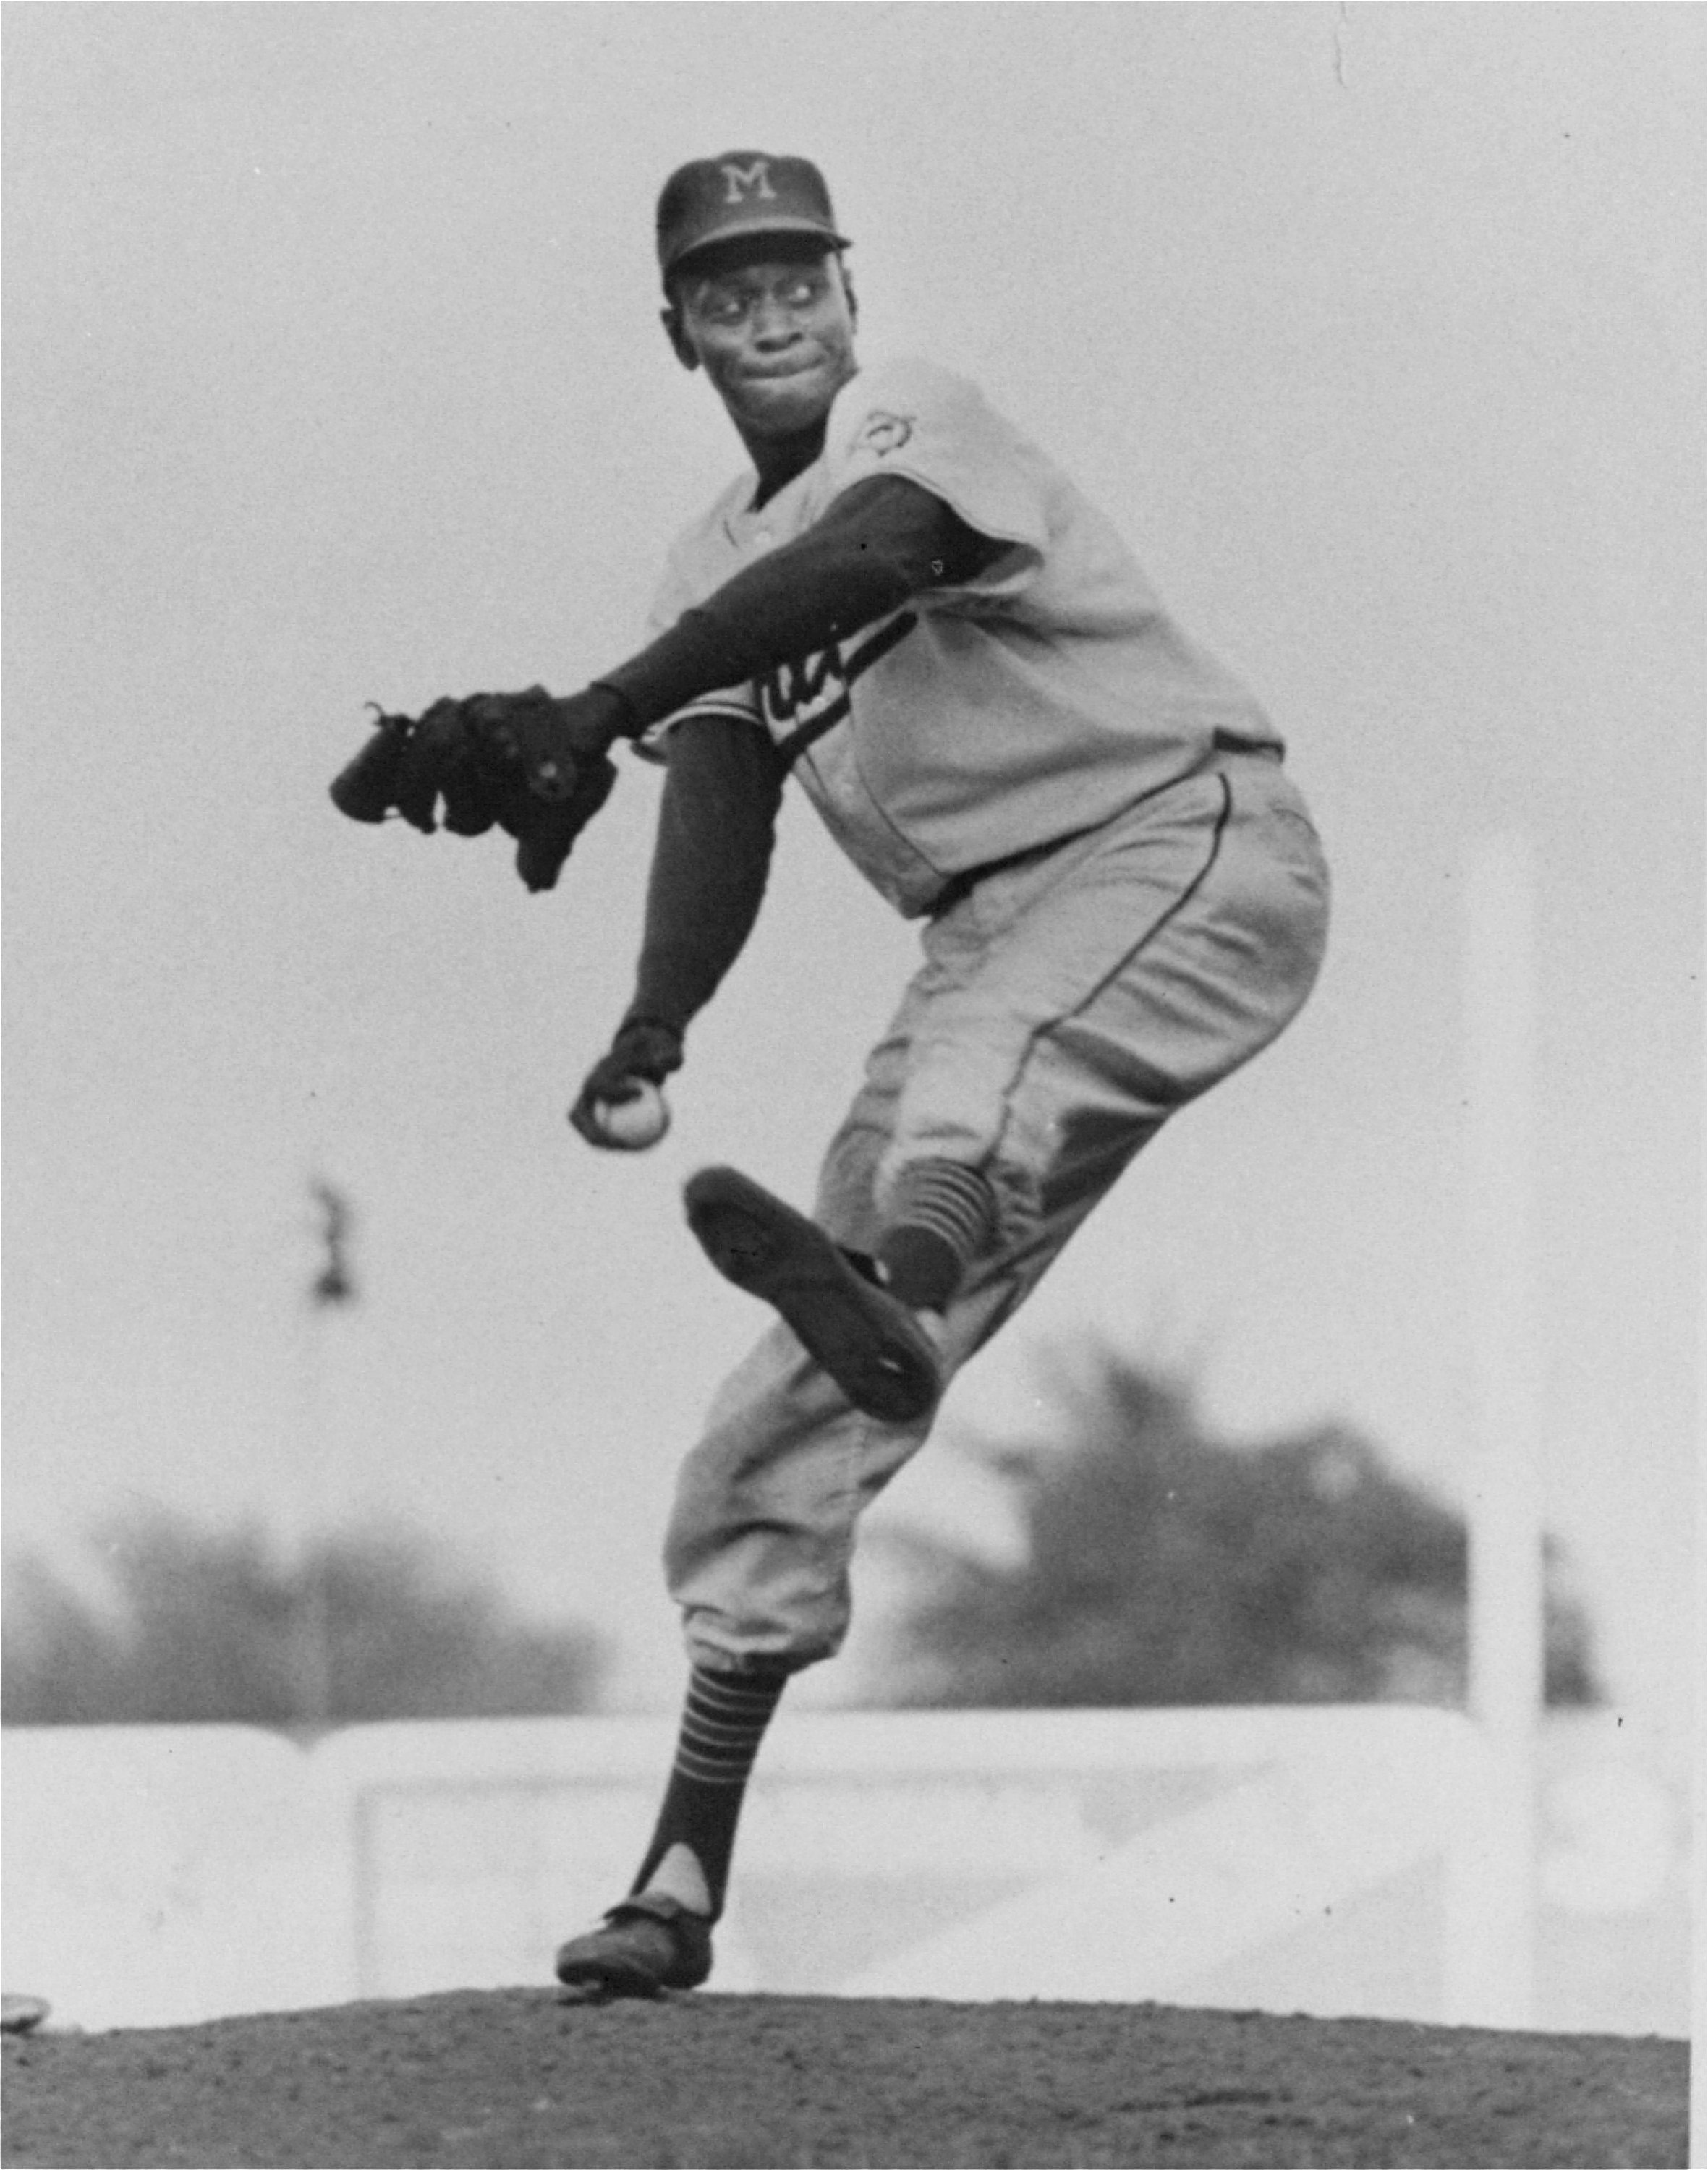 Paige briefly played for the Miami Marlins during his career. Here, Paige winds up for the pitch against the Montreal Royals in the second game of the doubleheader on April 29, 1956, in Miami. Paige stayed for seven innings and held the Royals to four hits and no runs. The Marlins took the first game 8-4 and the second 3-0.